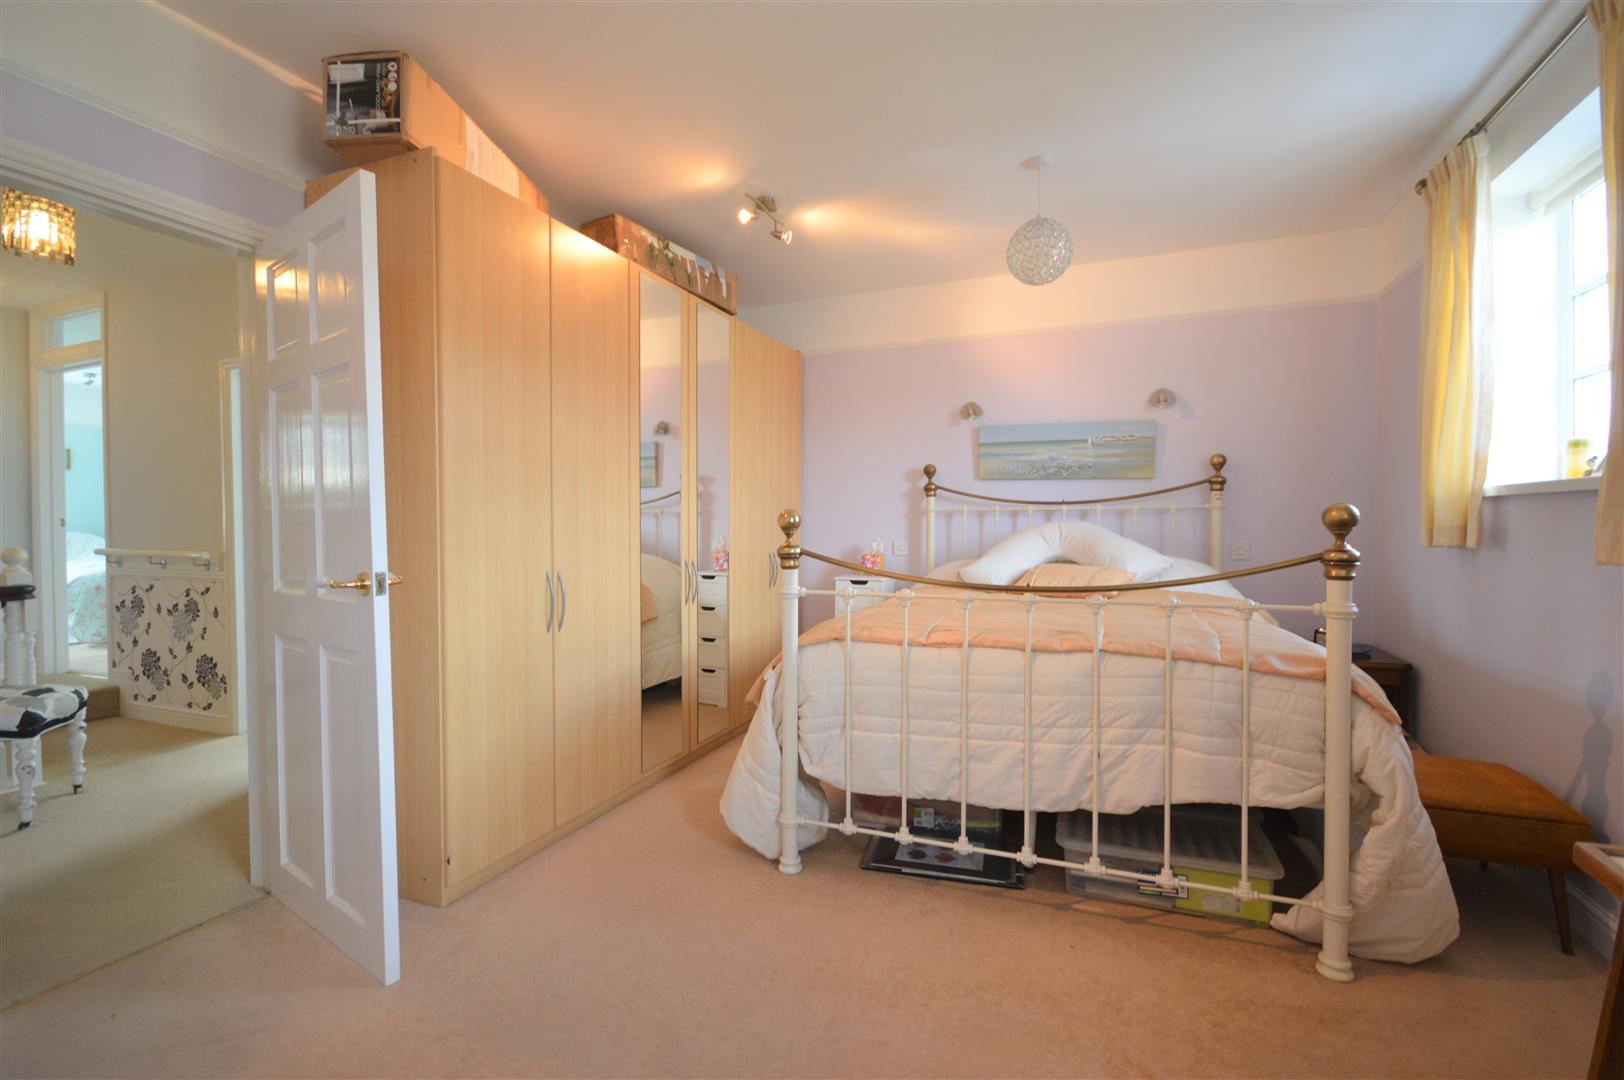 4 bed town house for sale in Leominster 10